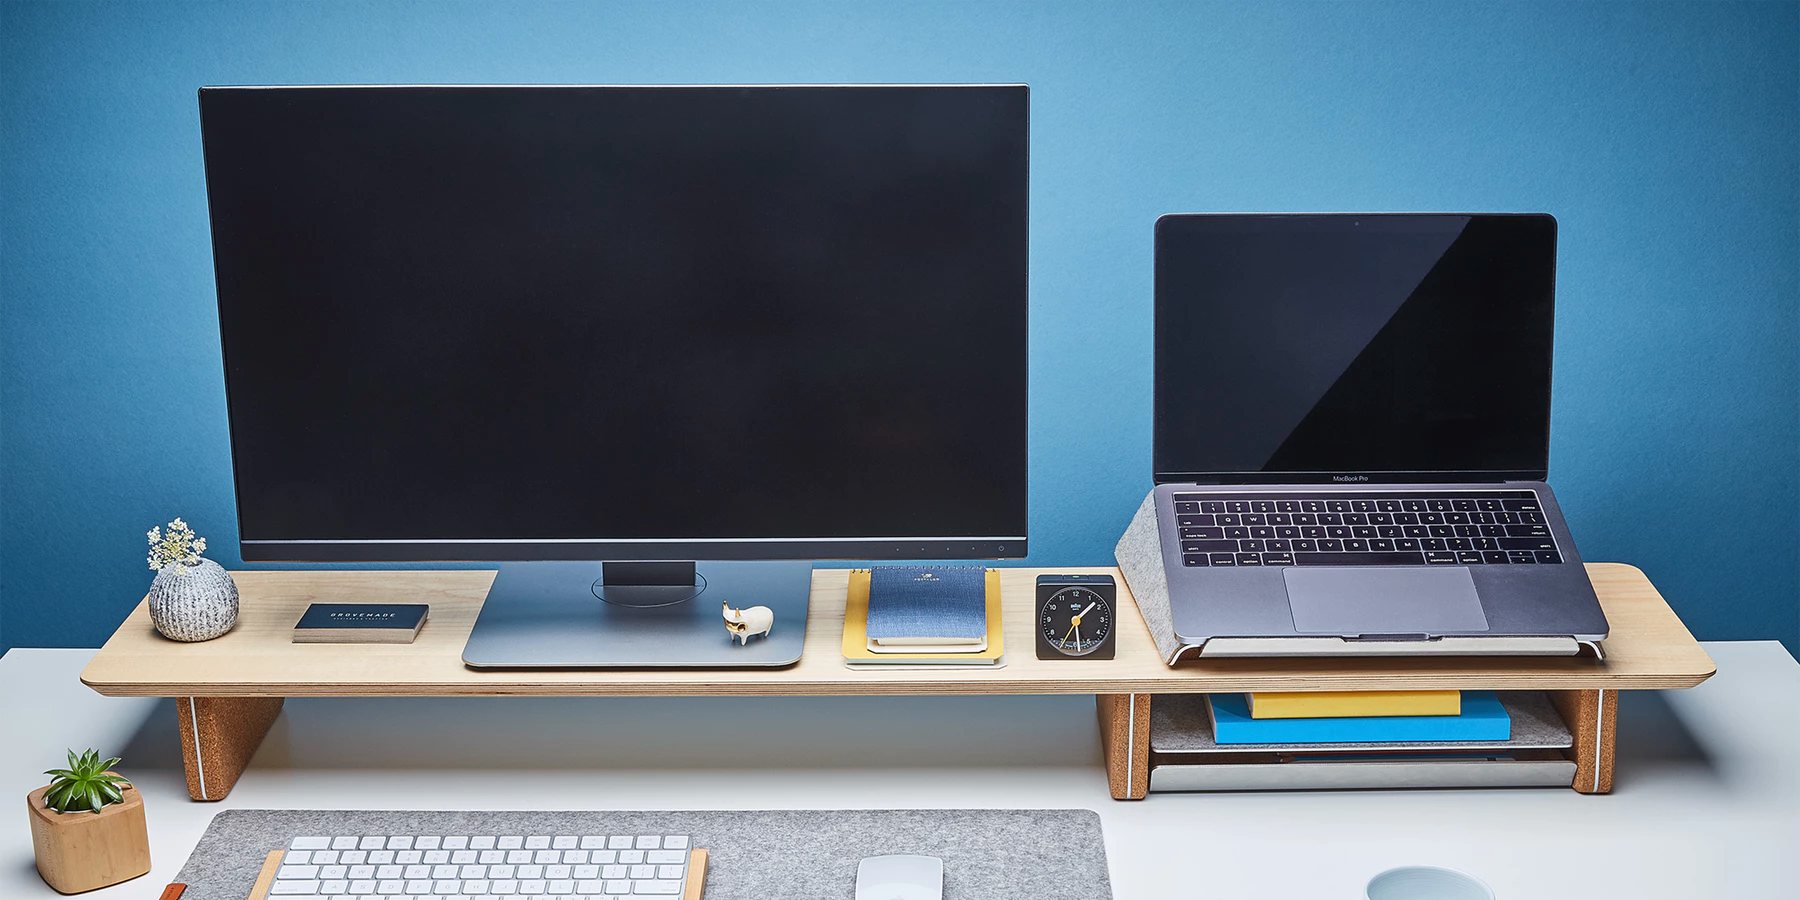 Grovemade's new Desk Shelf System brings organization to your workspace